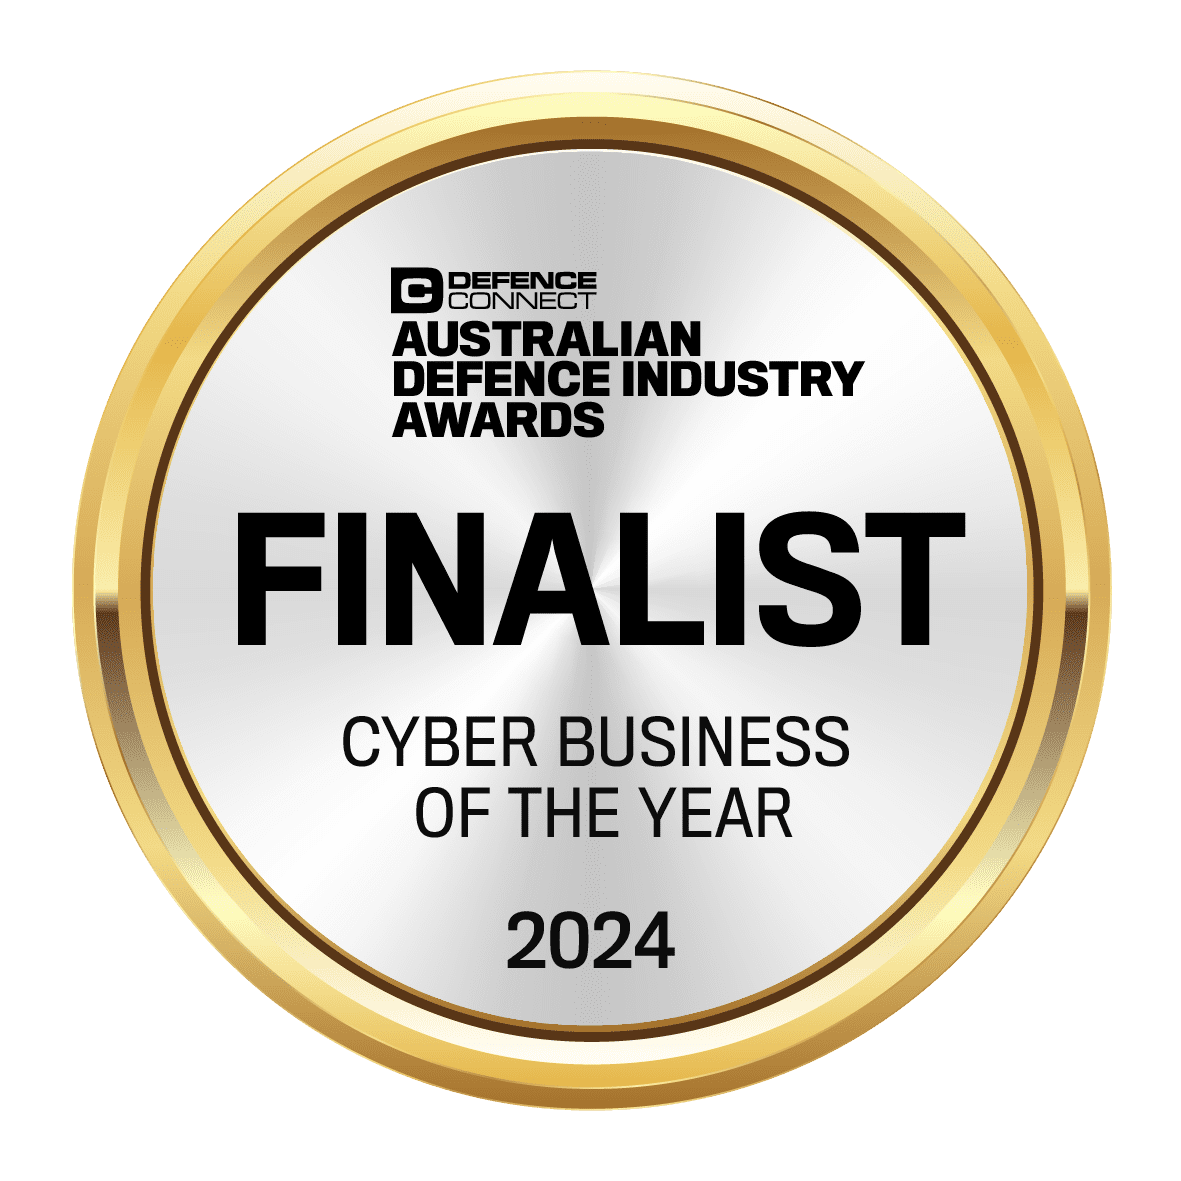 Australian Defence Industry Awards 2024 for Cyber Business of the Year FINALIST